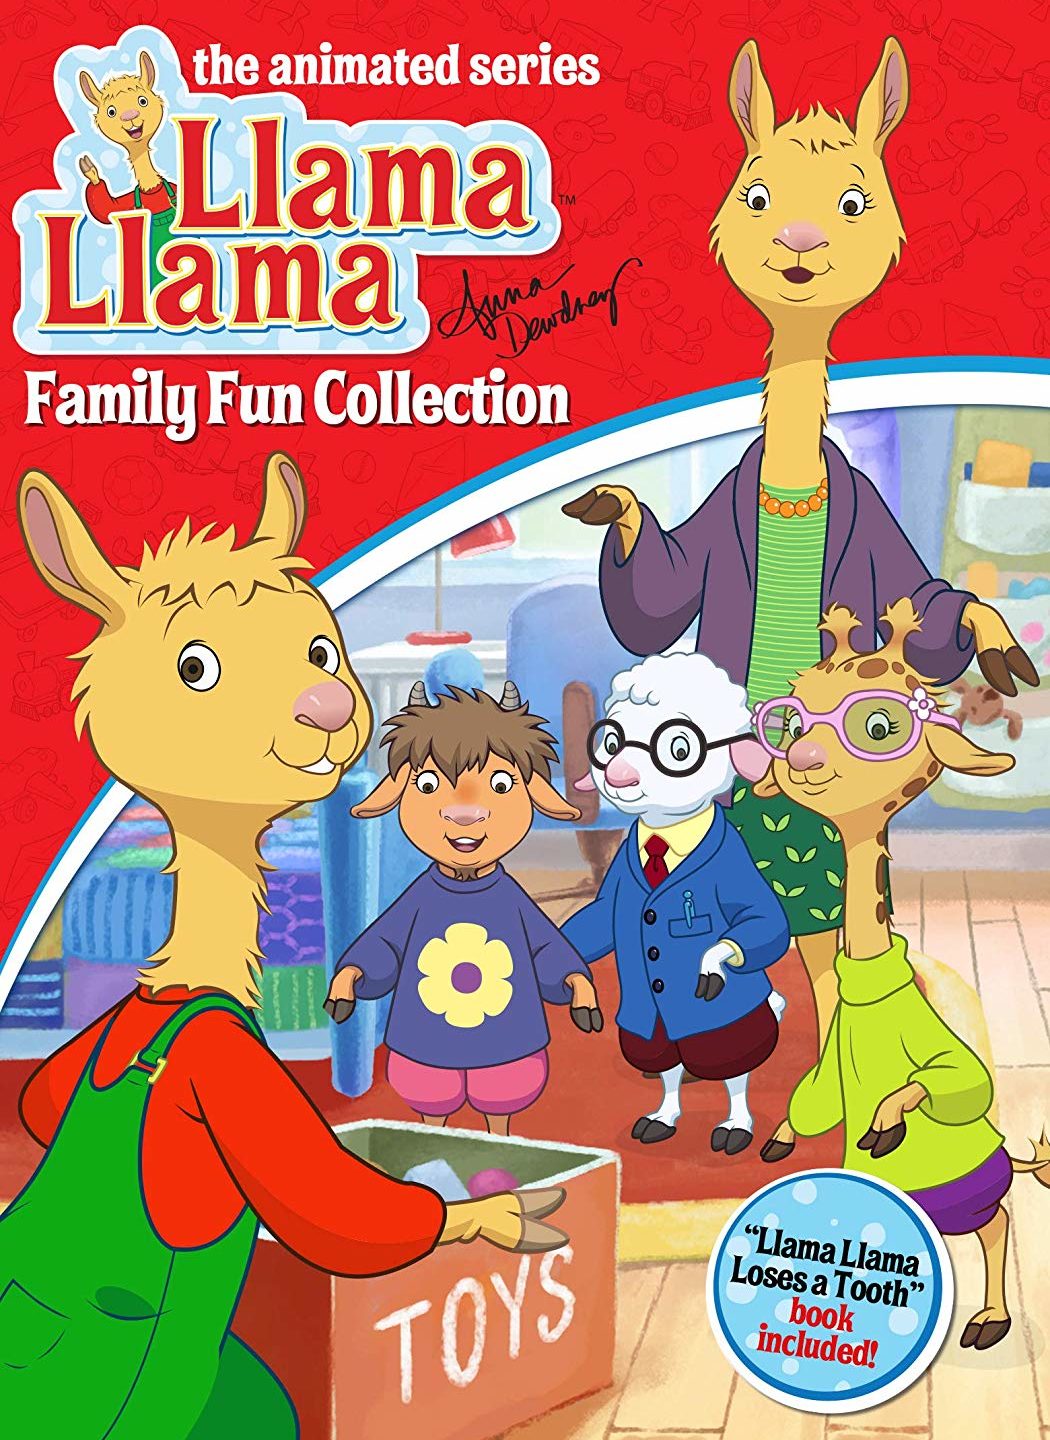 Cute, Fun, Family-friendly DVD based on the award-winning book and TV series.